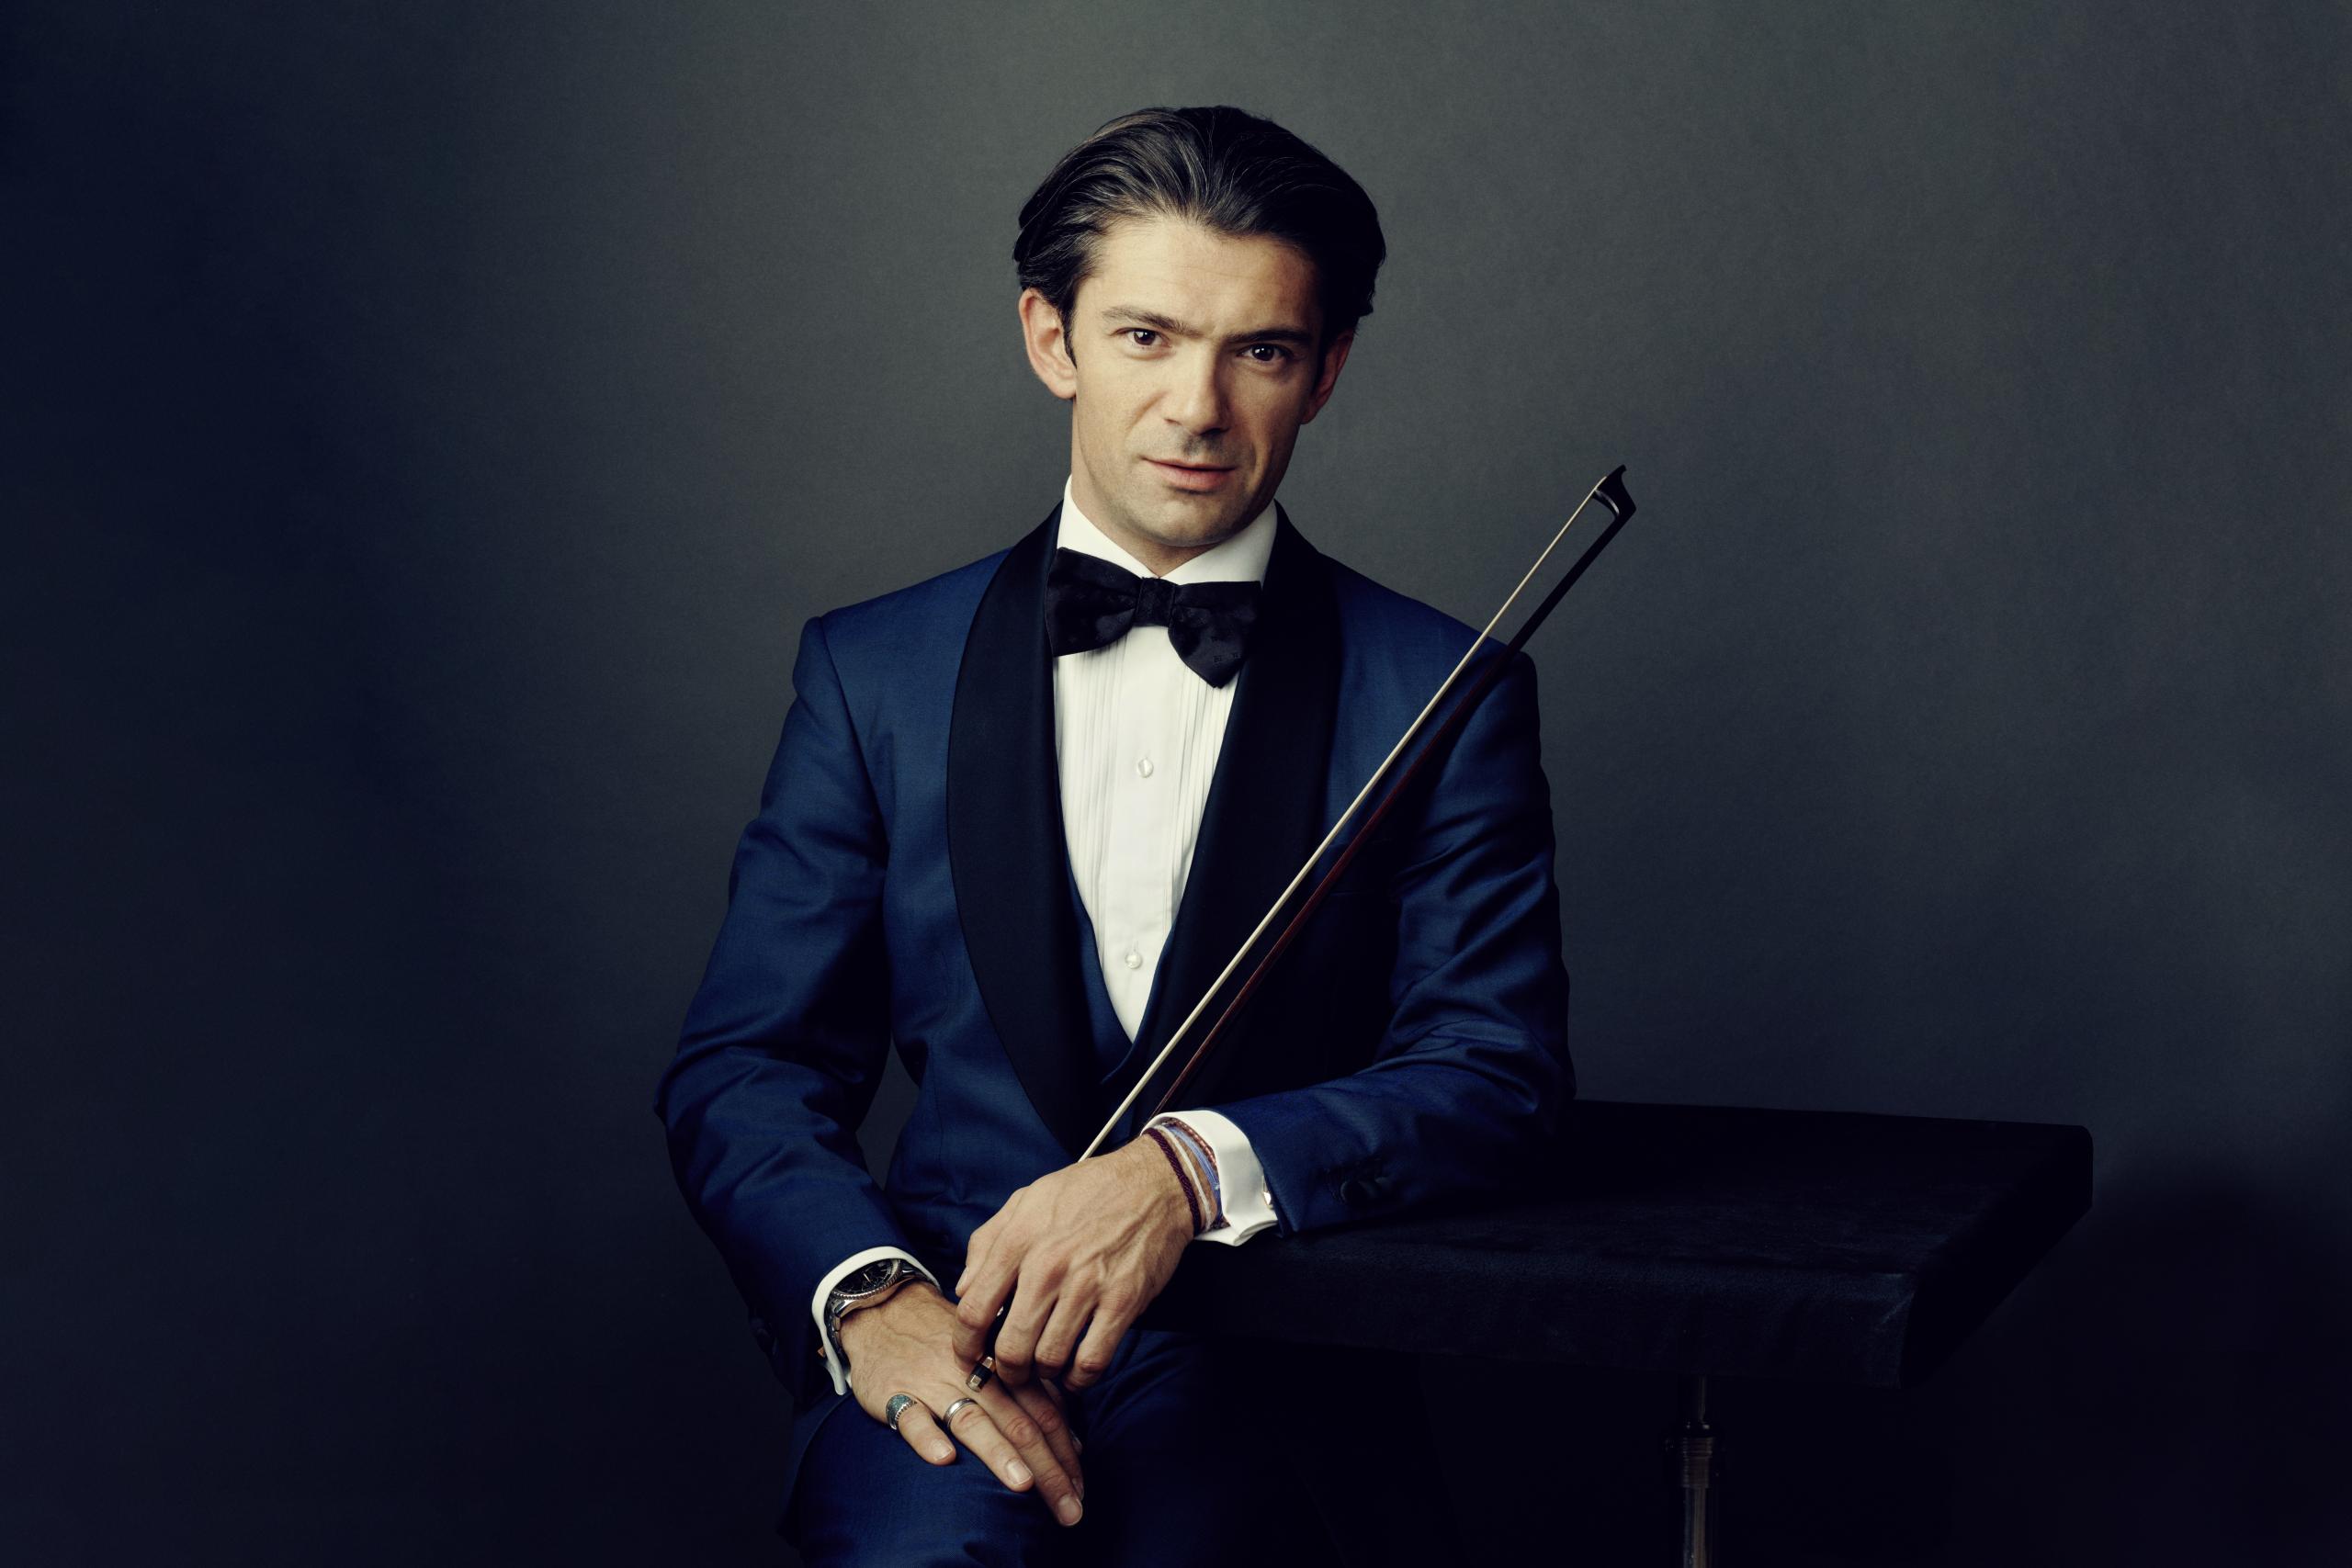 Cellist Gautier Capuçon sits frontally in front of the camera, supporting himself sideways with his arm while holding his bow in his hand.